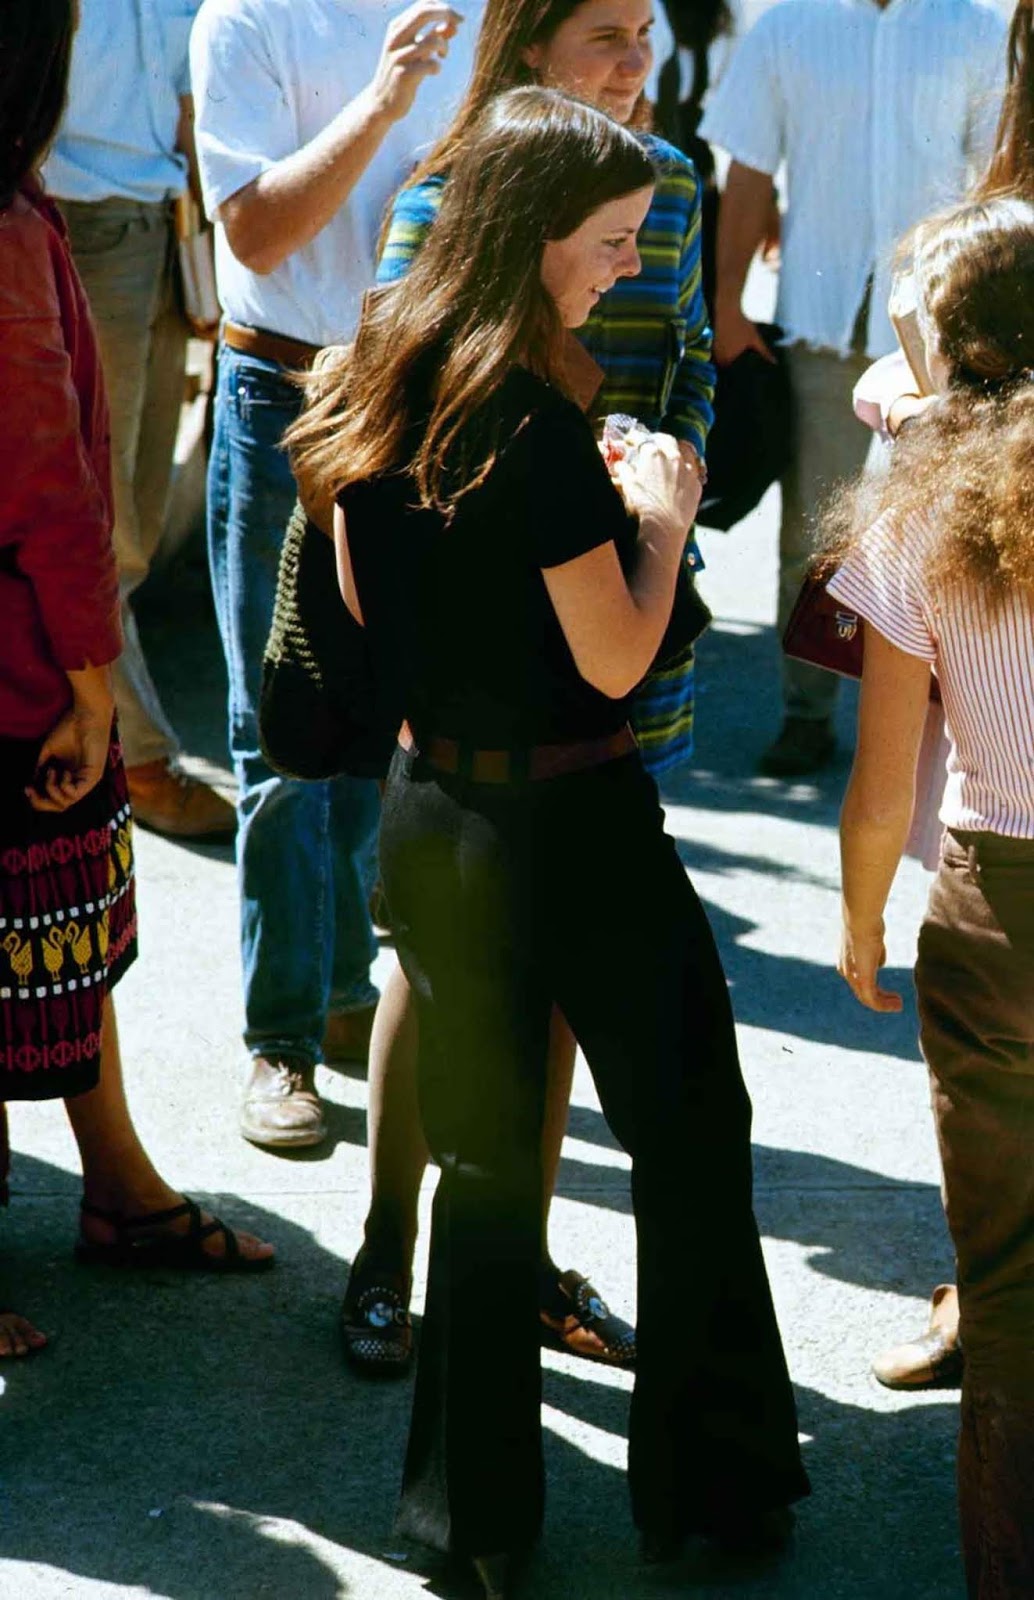 A high school student among other classmates while wearing black bell bottoms.